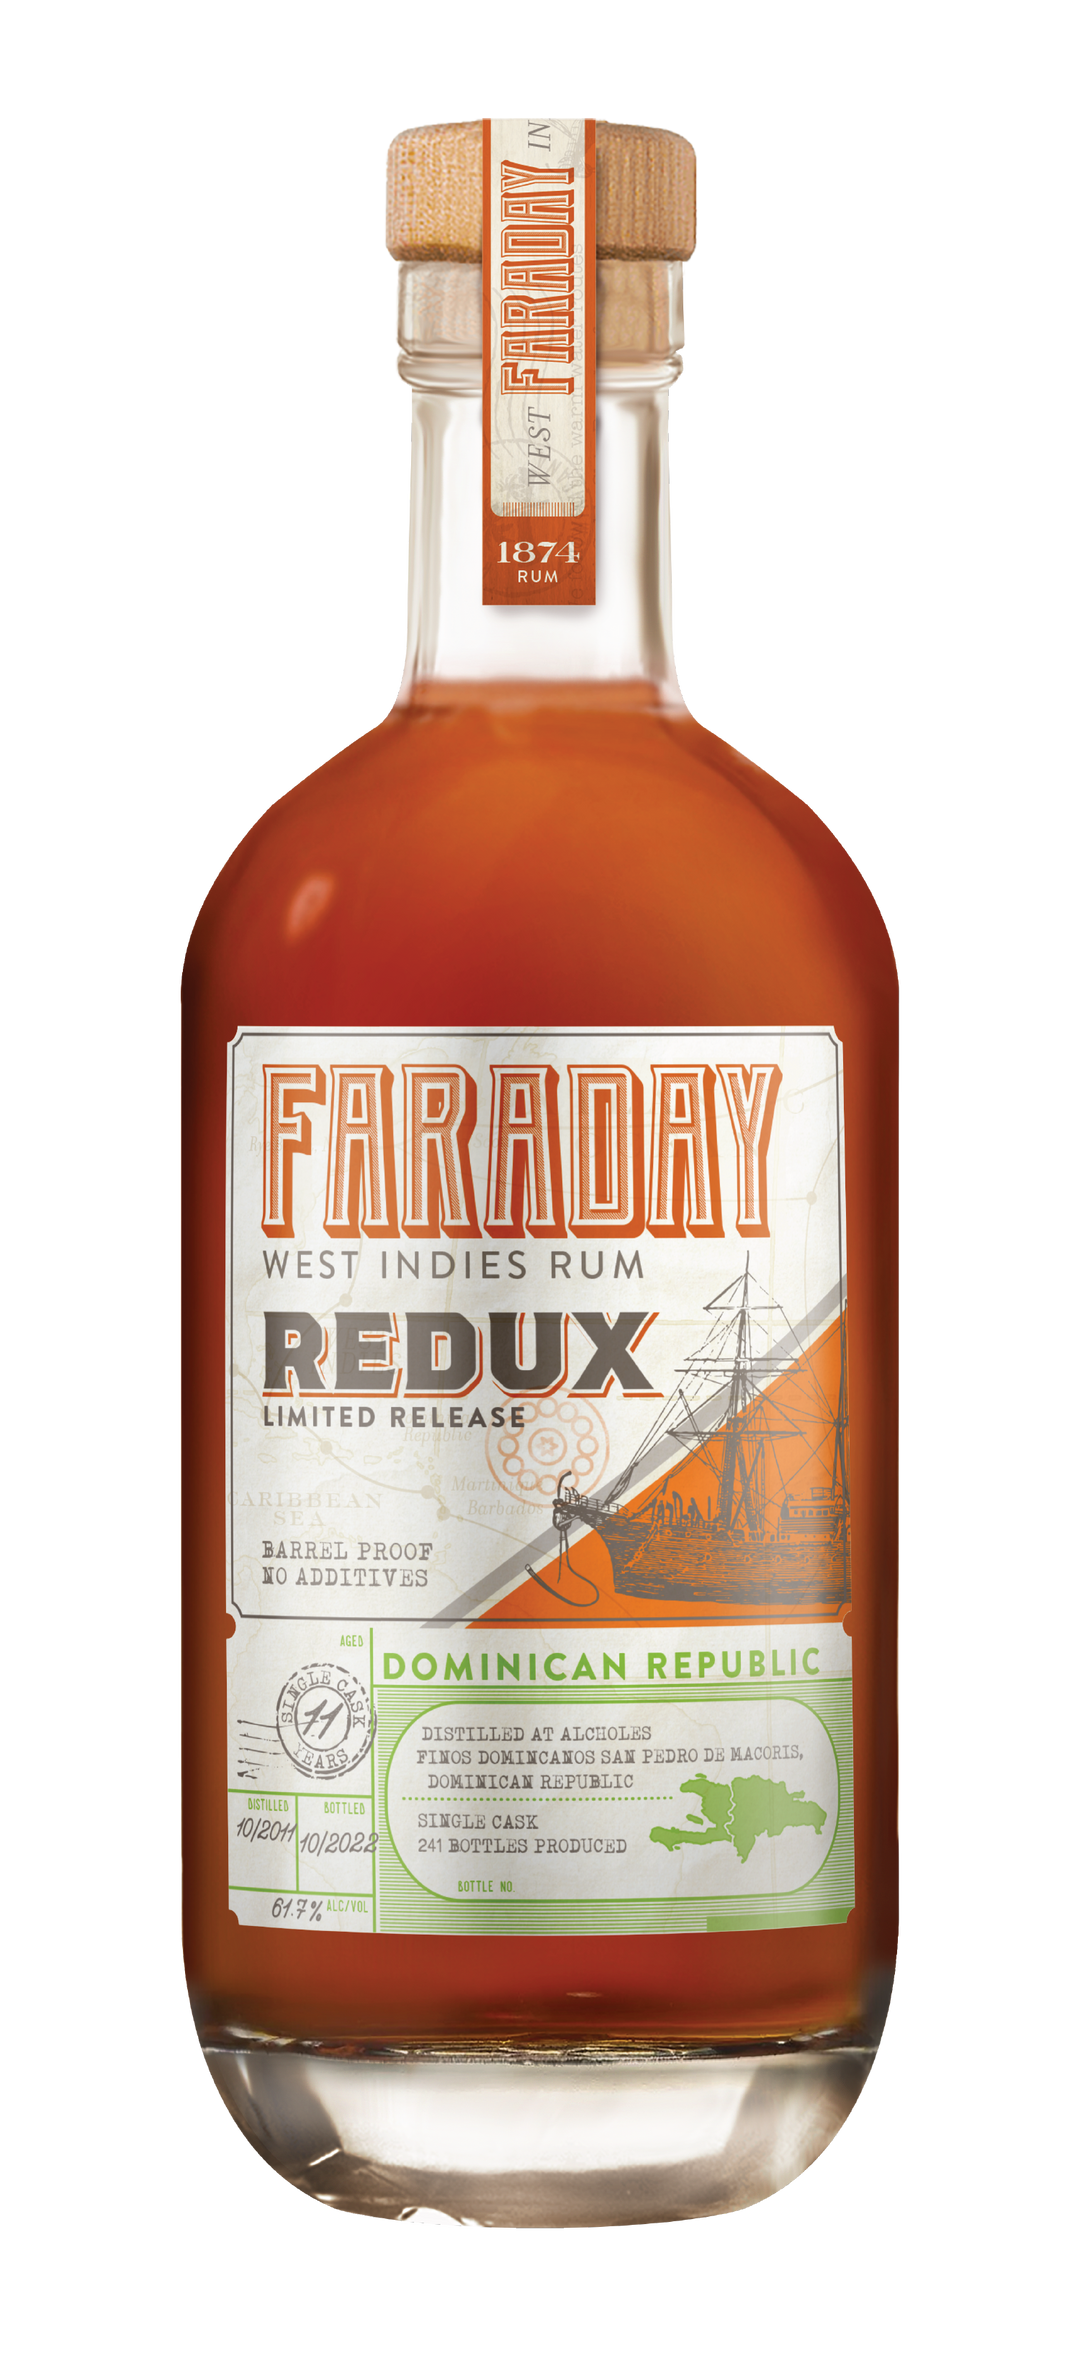 Faraday West Indies Redux Limited Release - Dominican Republic Single Cask 11 Years Aged